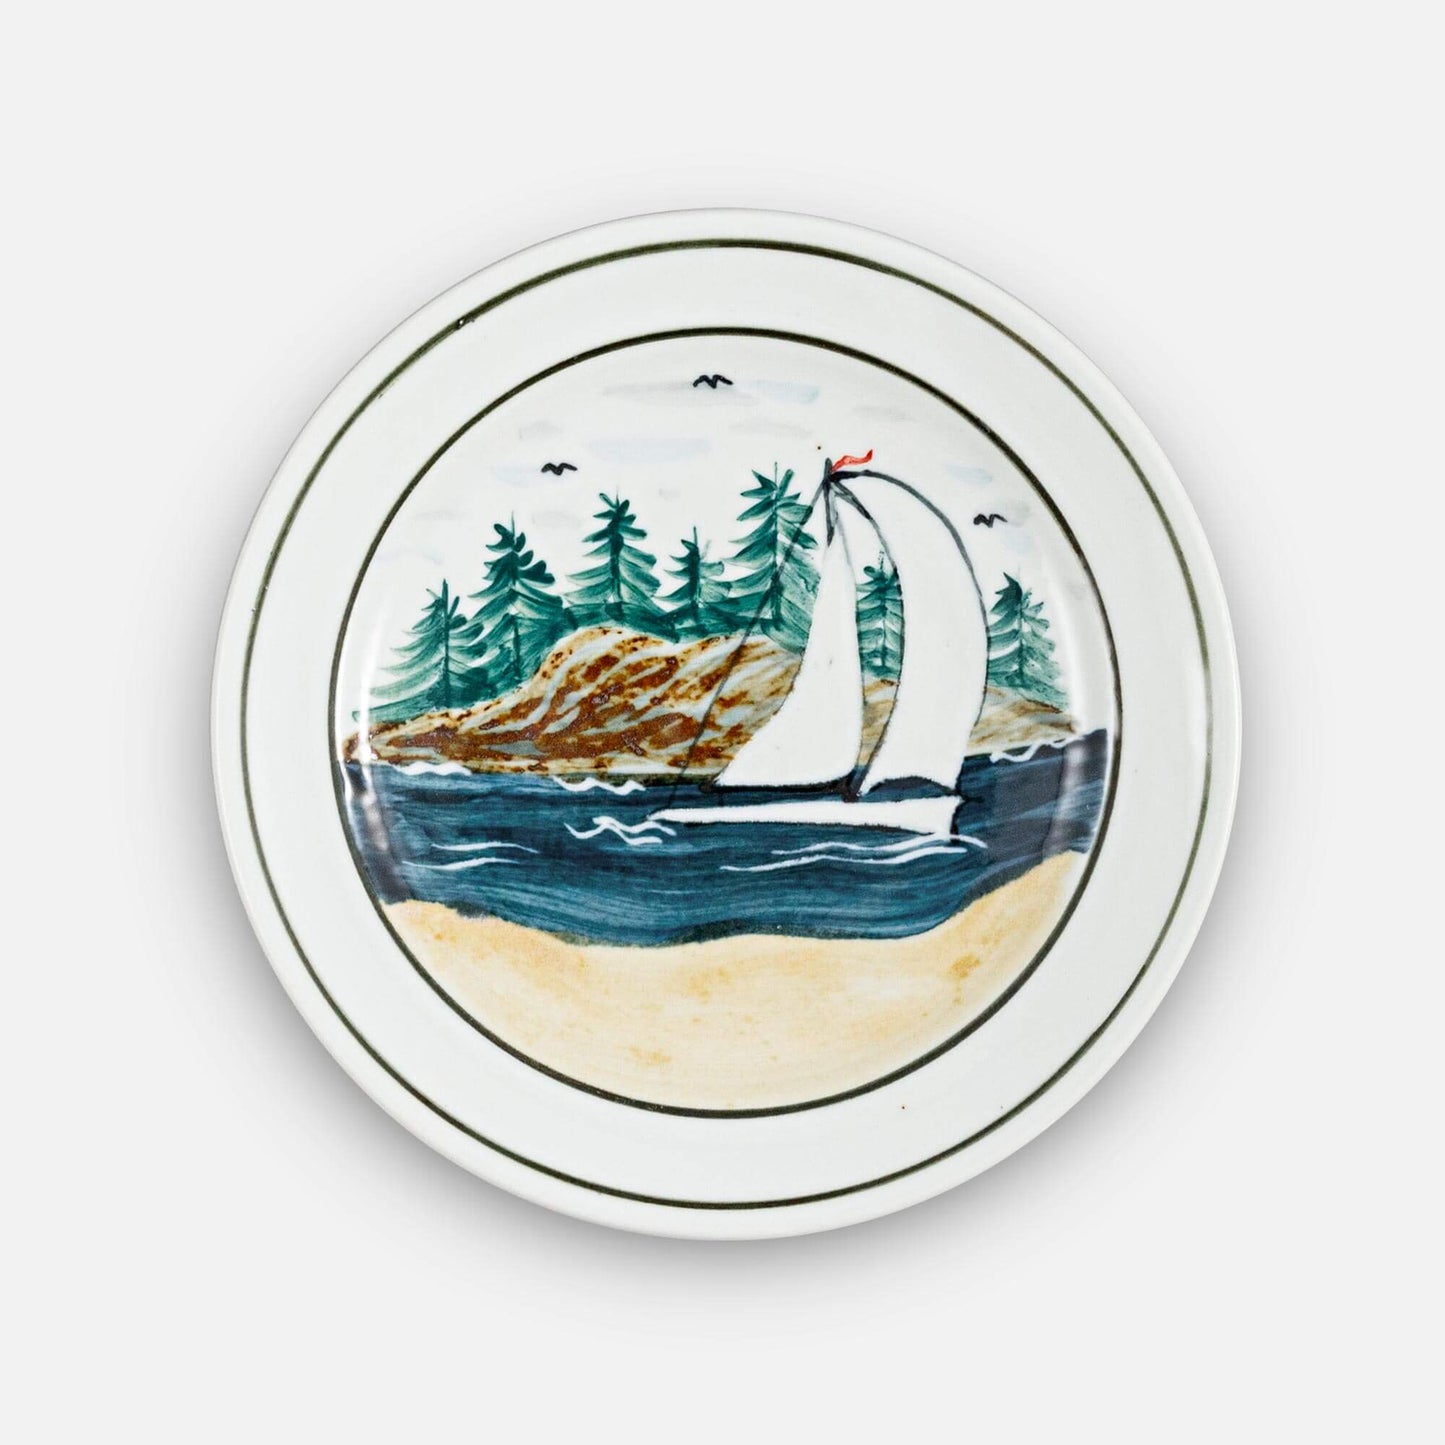 Handmade Pottery Footed Dinner Plate in Sailboat pattern made by Georgetown Pottery in Maine